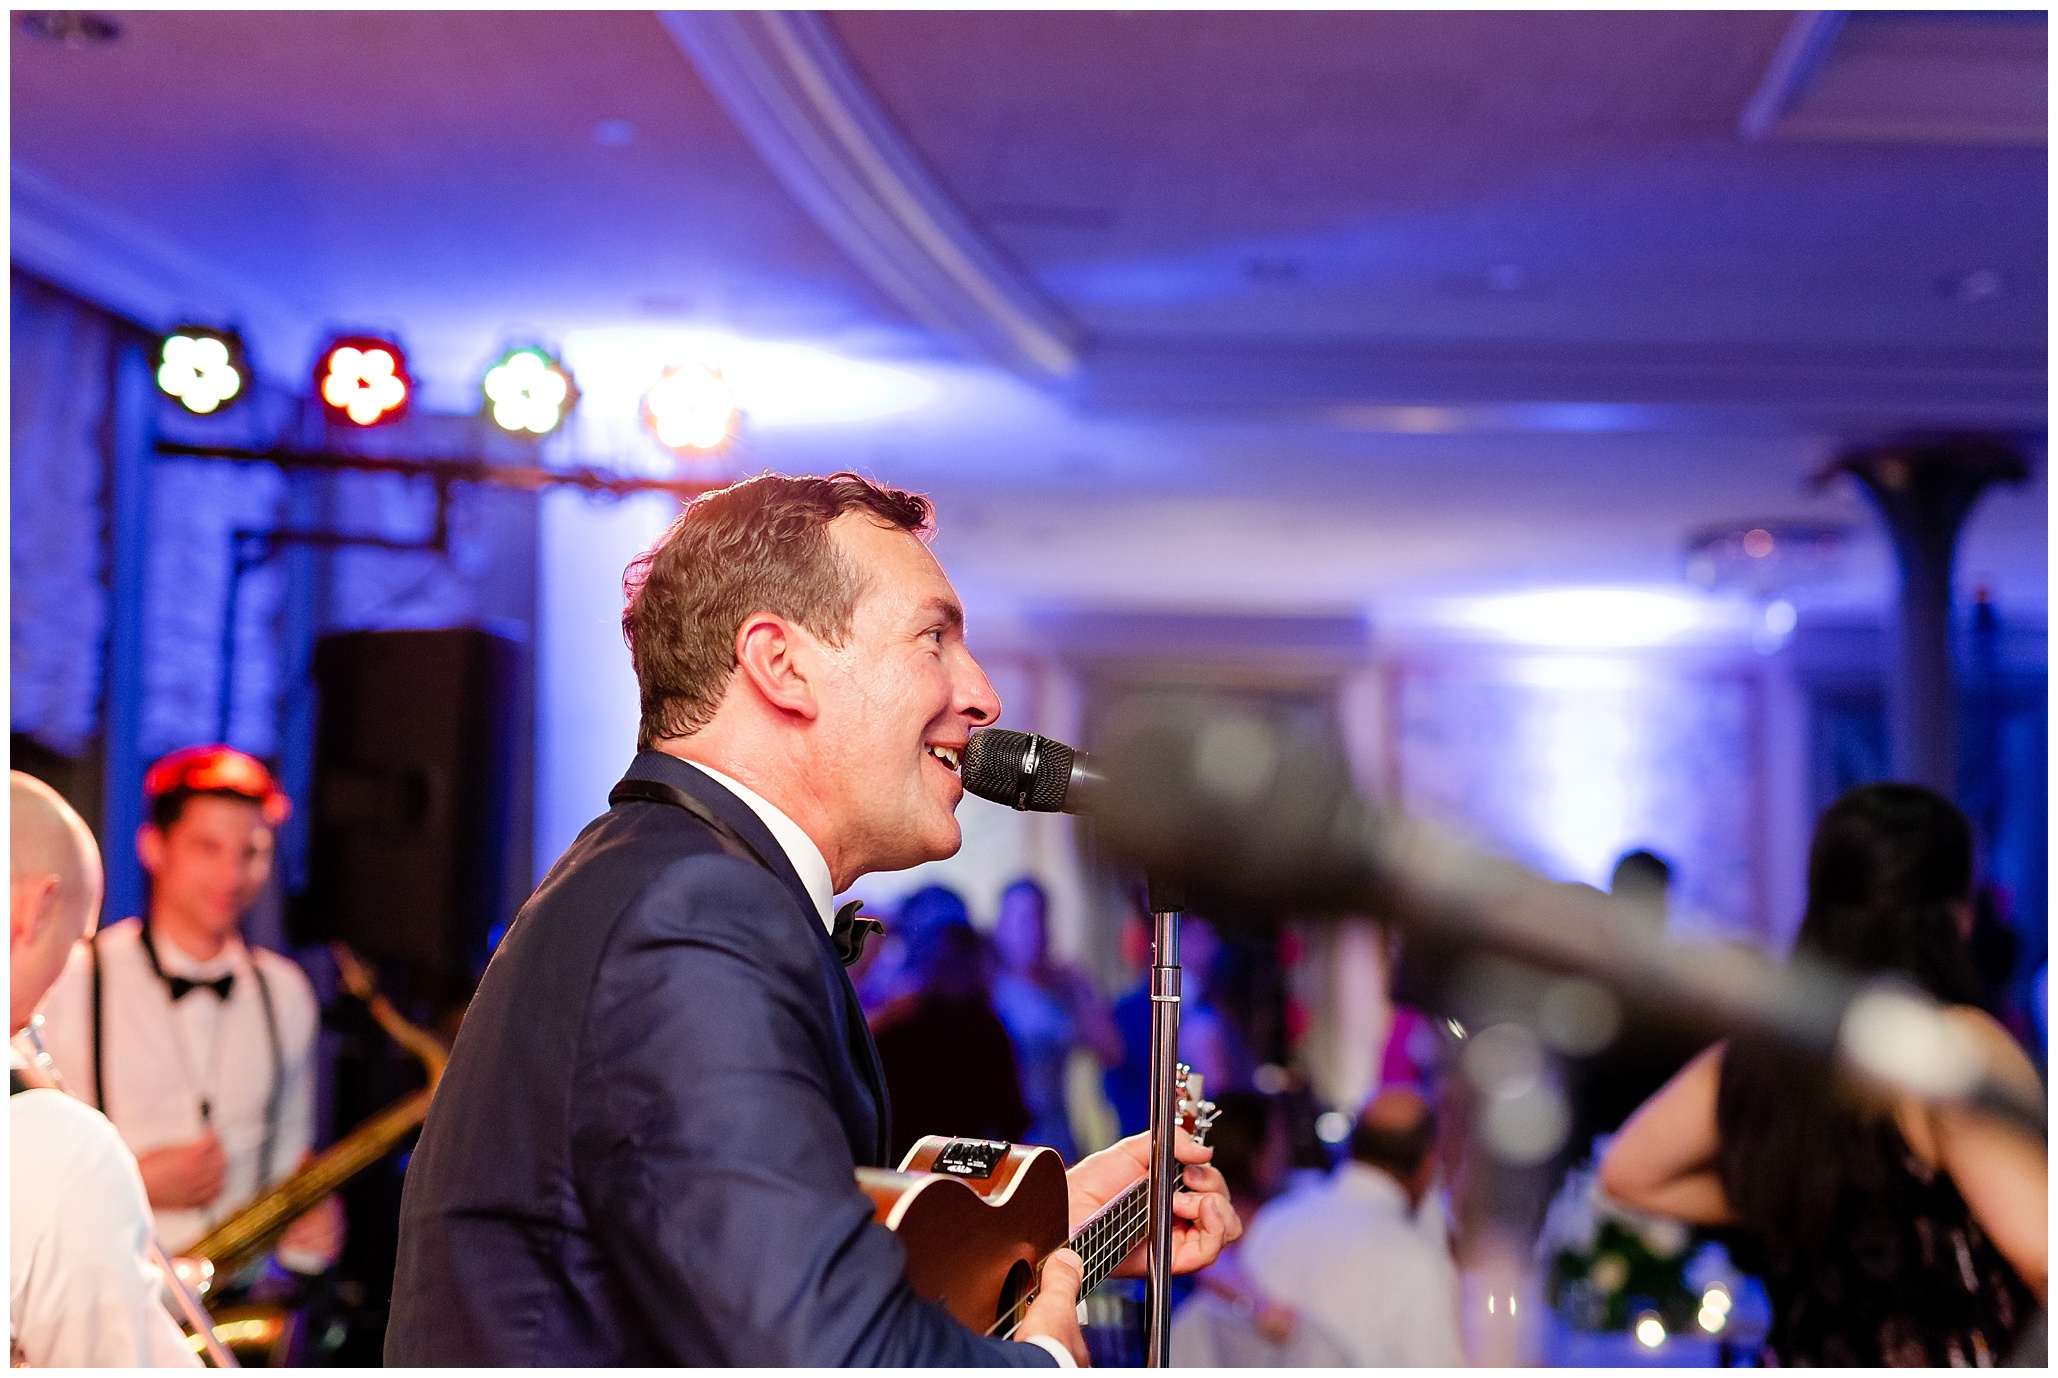 Top 5 Wedding Entertainment in Virginia recommended by Luke and Ashley Photography